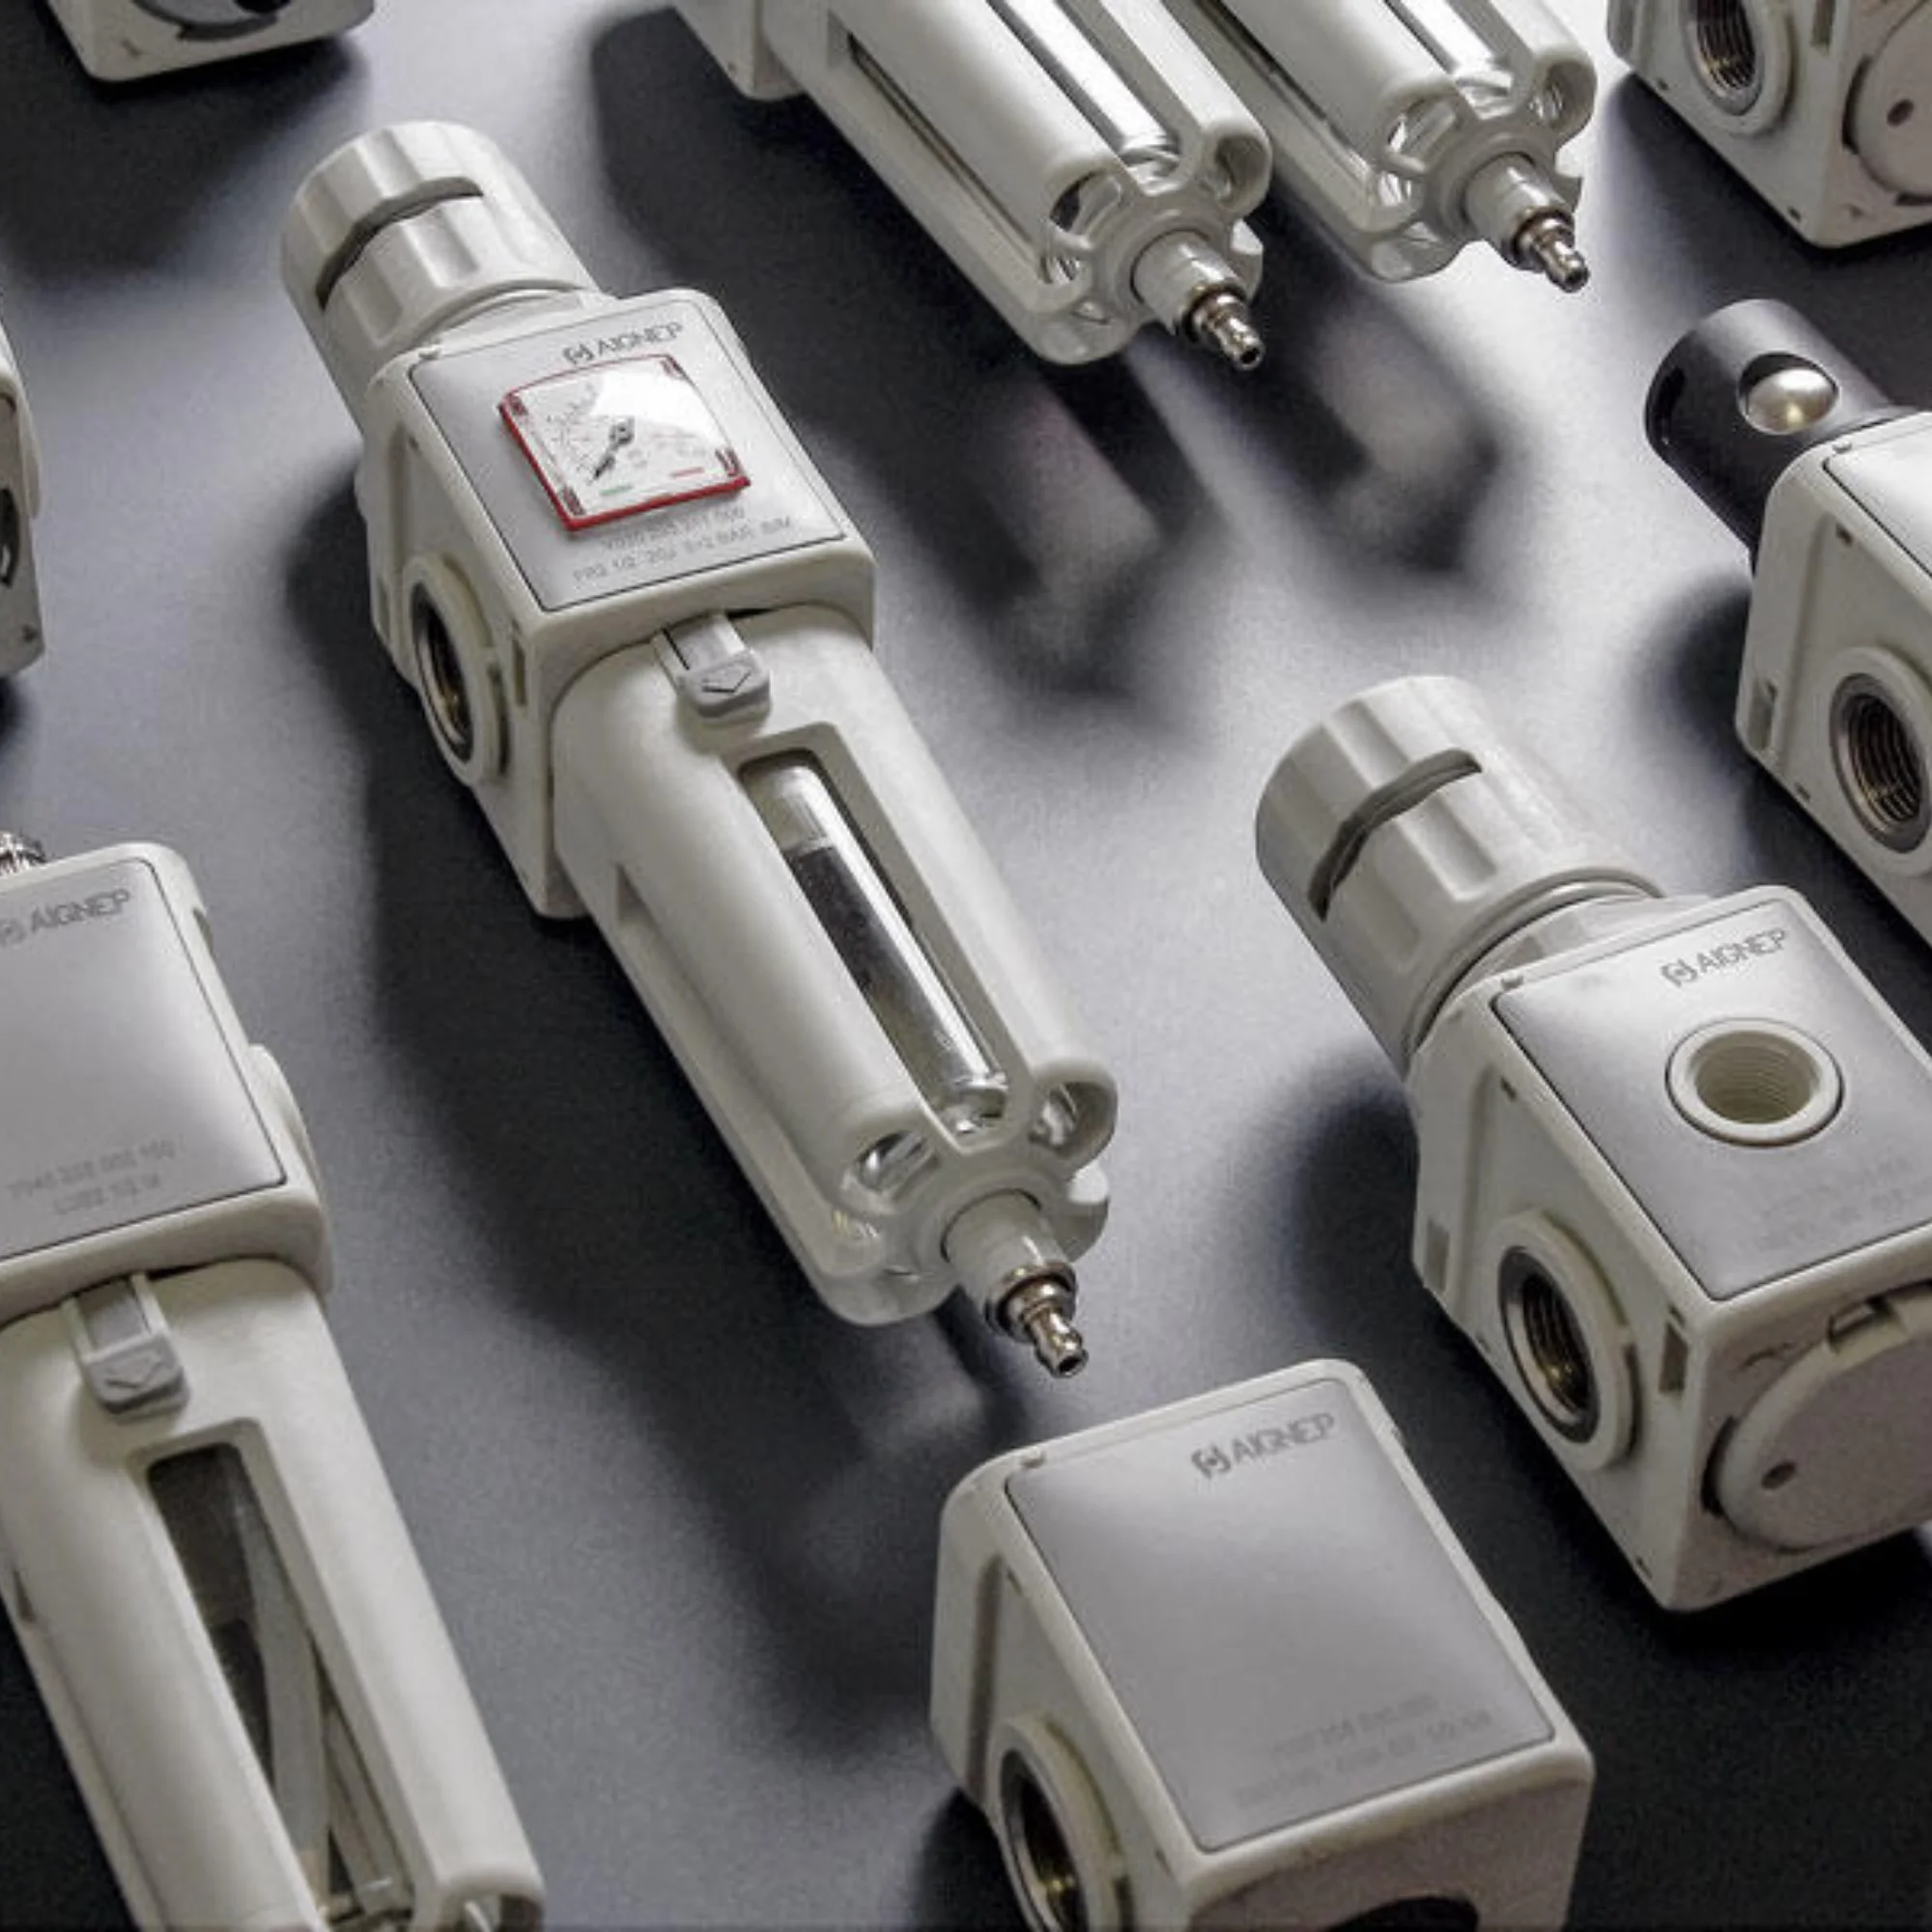 AIGNEP - Valves, pneumatic actuators electric actuators and F.R.L. units for any type of application